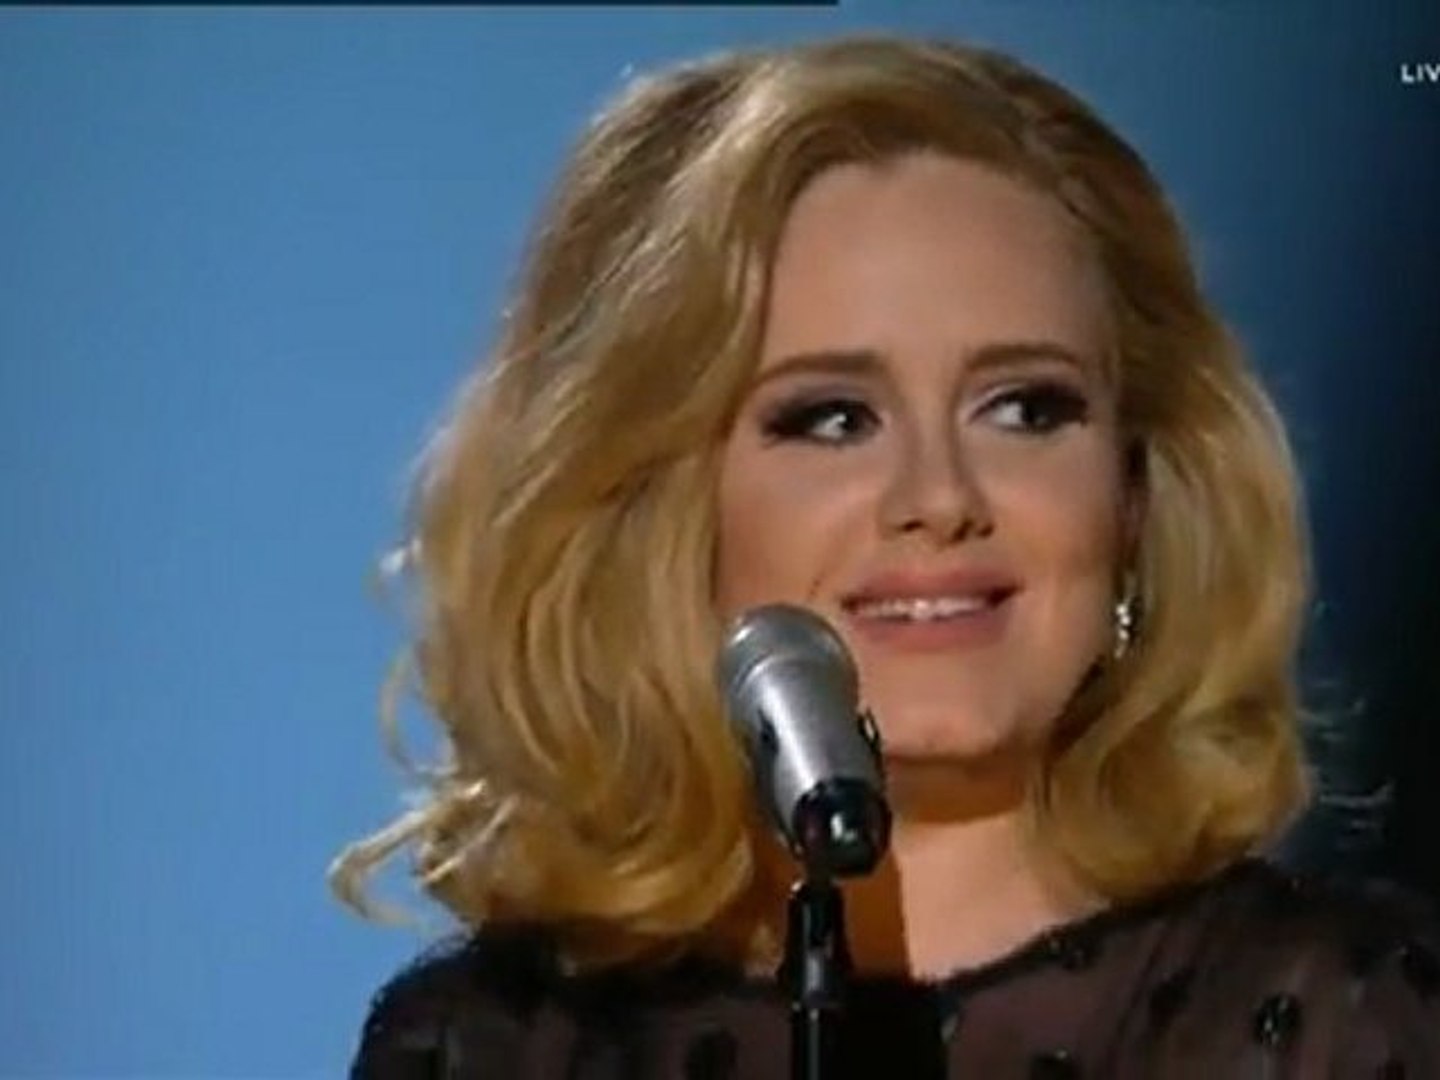 In deep rolling the Adele